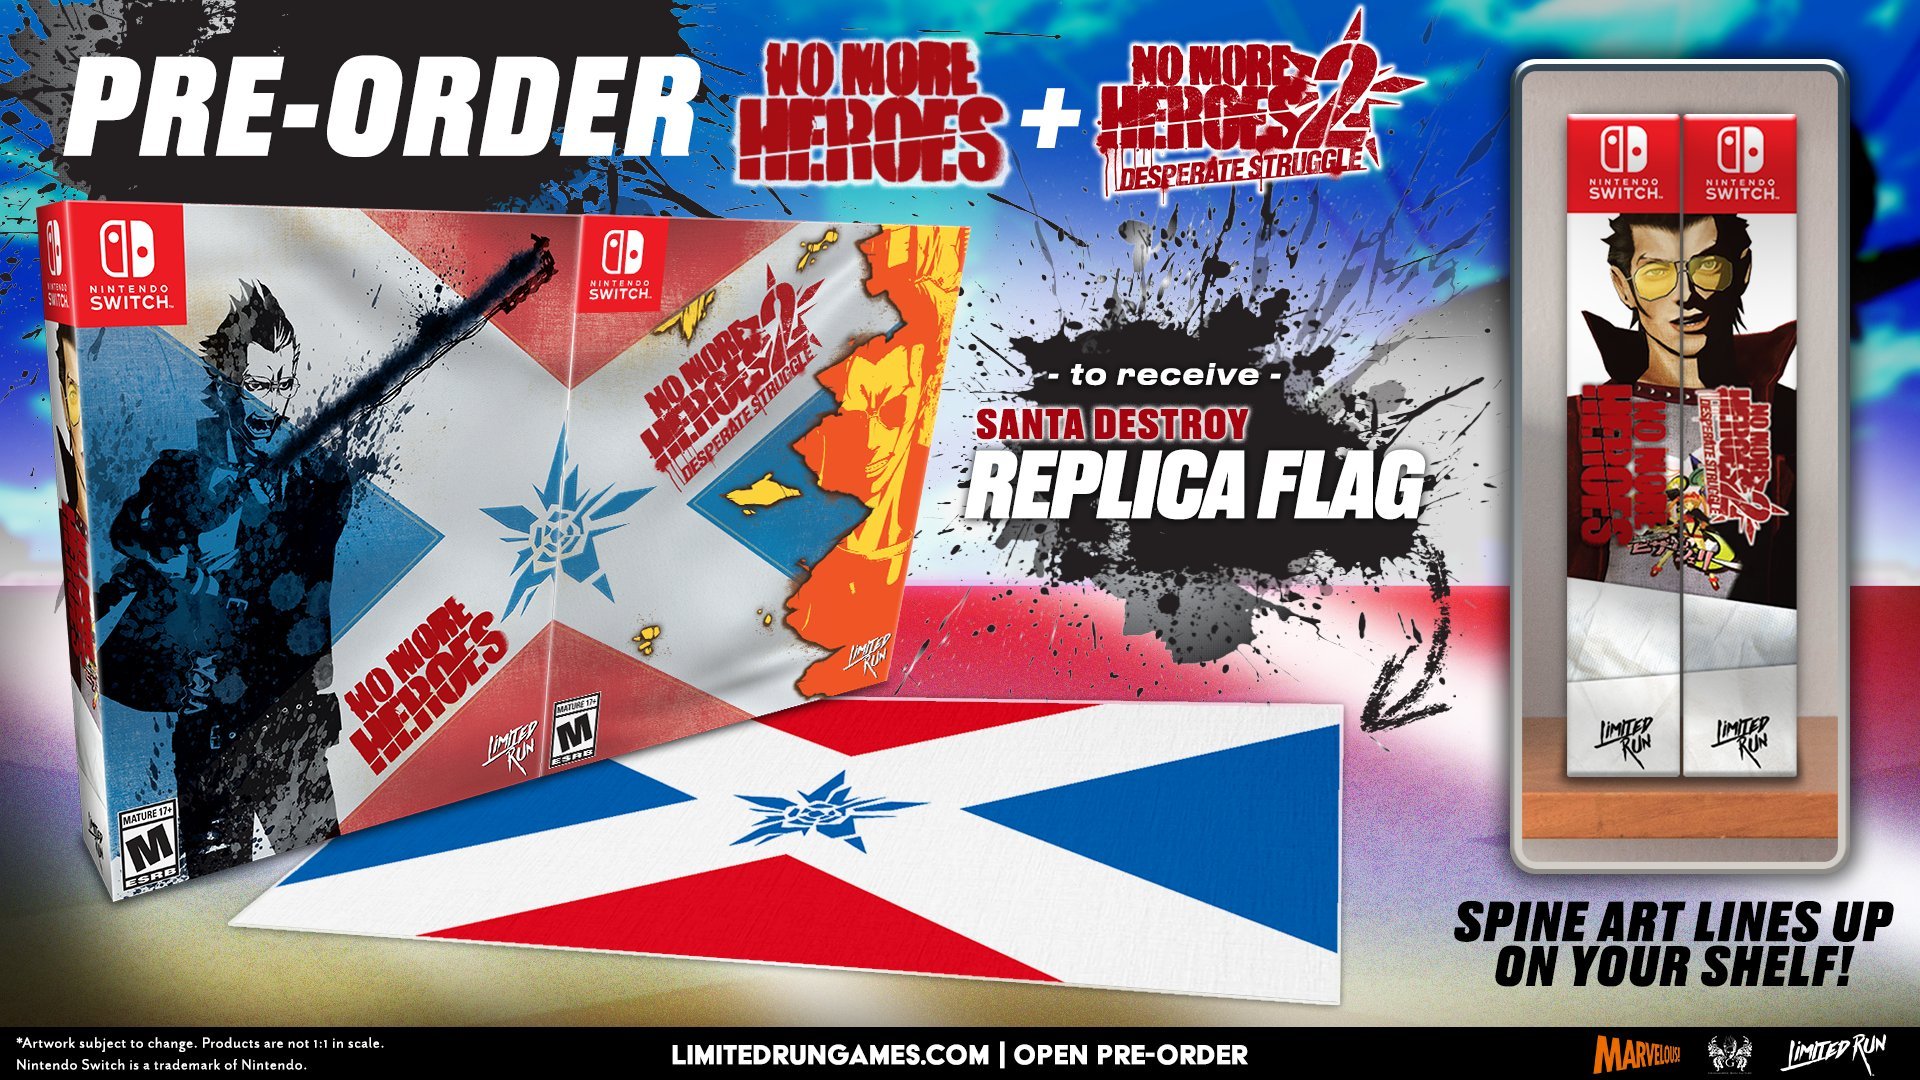 No More Heroes and No More Heroes 2: Desperate Struggle Switch pre-ordered physical edition pre-orders will open on March 12